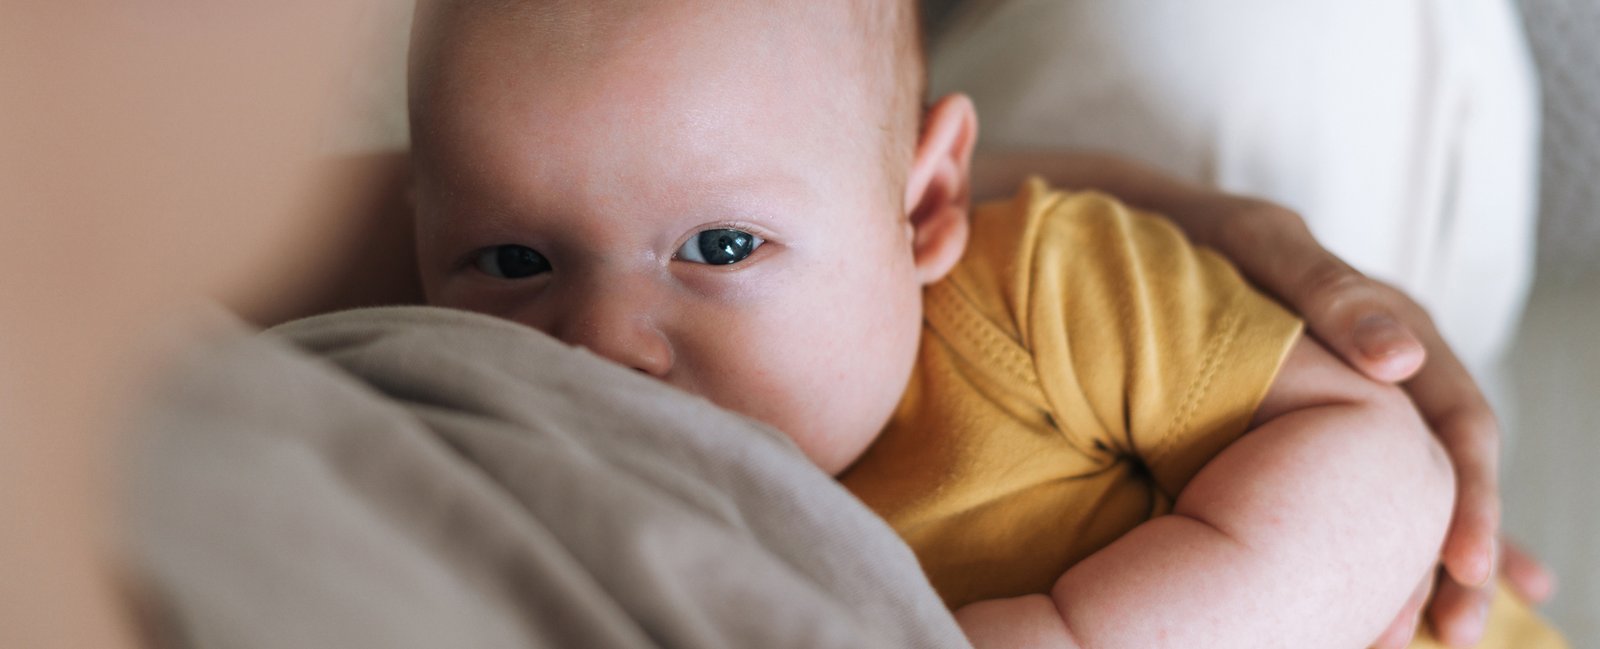 THC From Cannabis Could Linger in Breast Milk For a Long Time : ScienceAlert